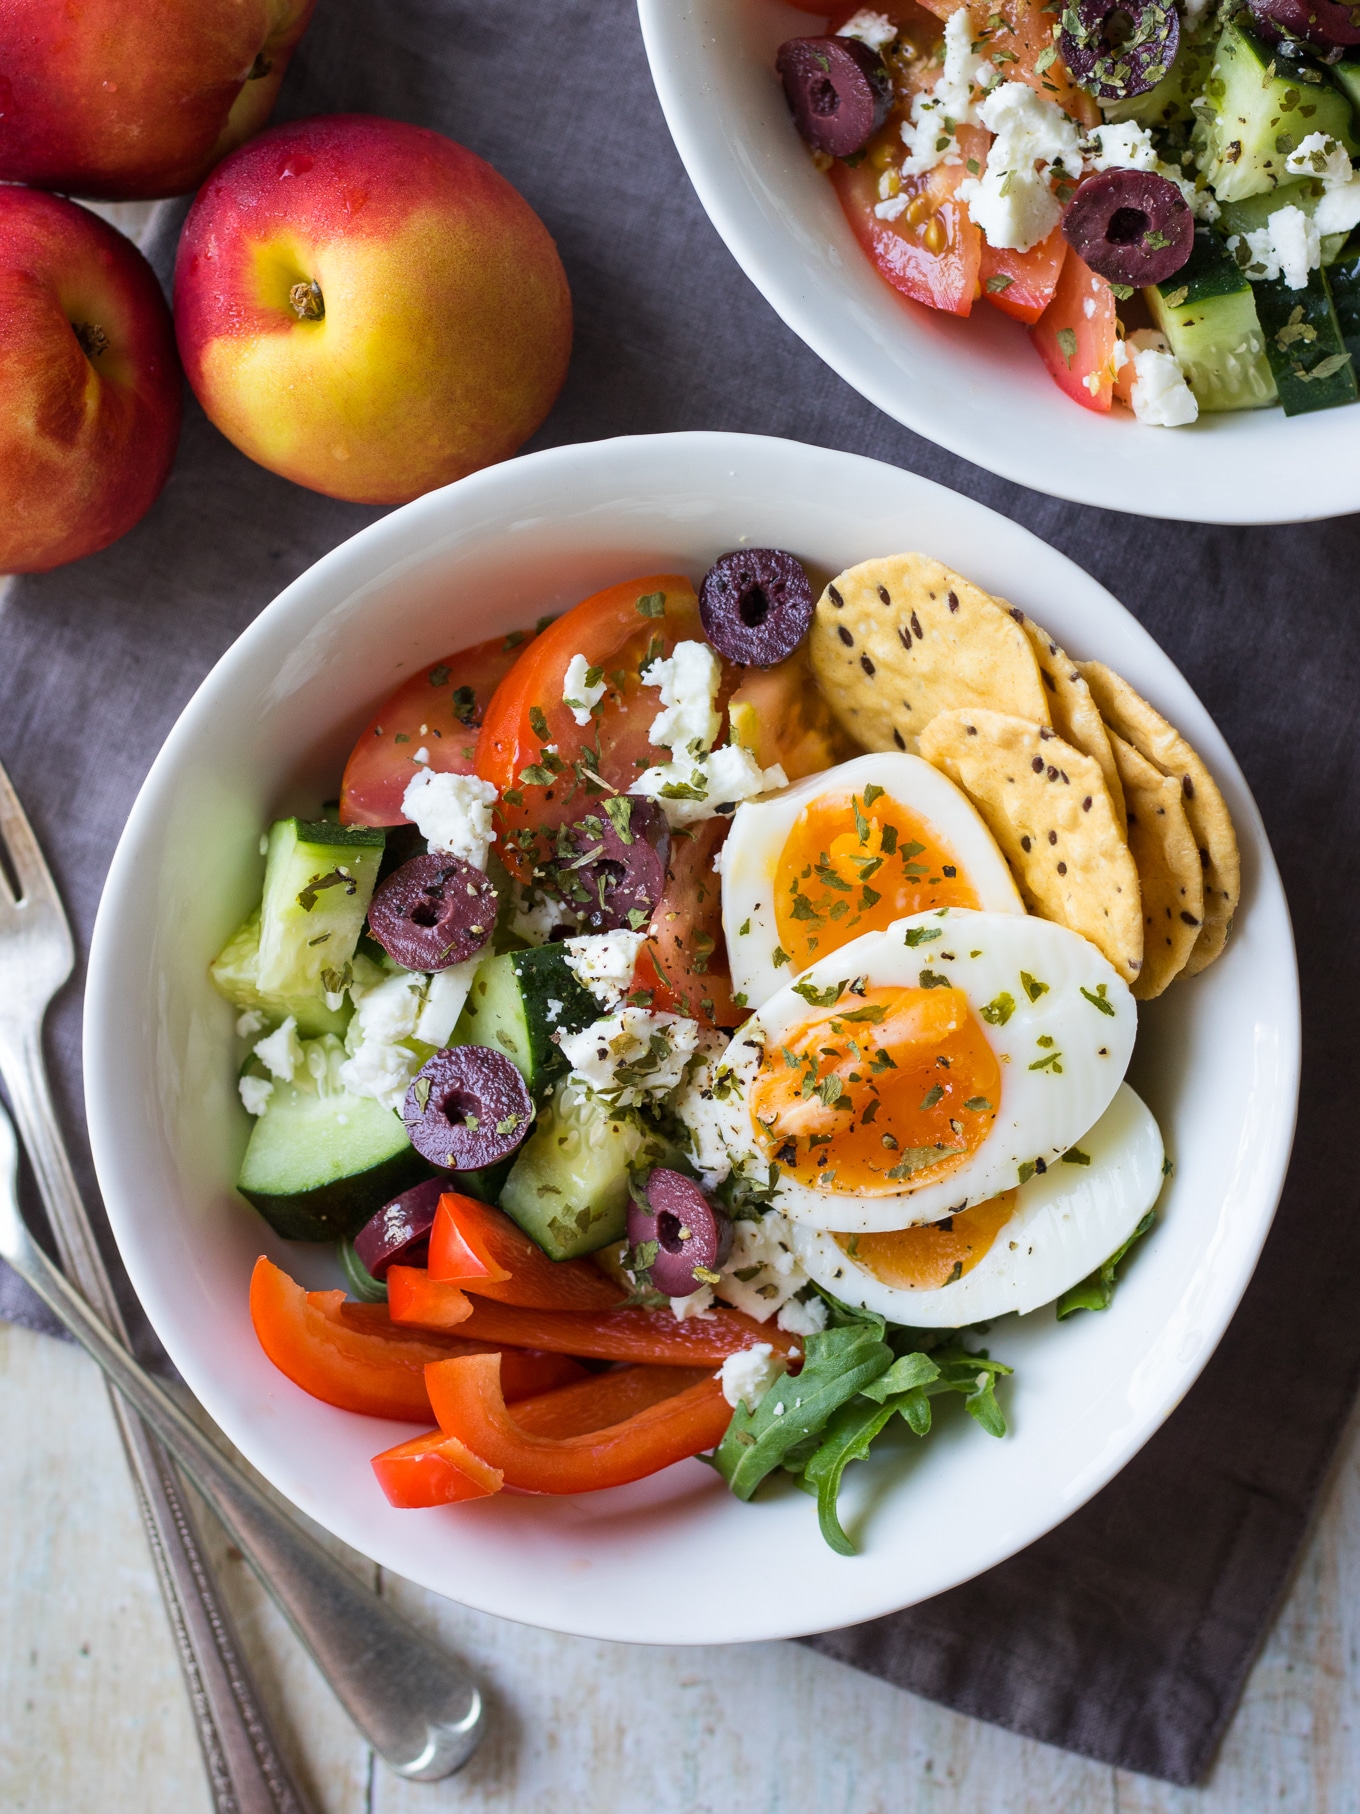 Greek style meal prep breakfast bowls! A fresh Greek salad base topped with boiled eggs makes a healthy start to the day. Tuck in some crackers and you're all set with a healthy breakfast pot! #mealprep #breakfastbowl #breakfastsalad #glutenfree